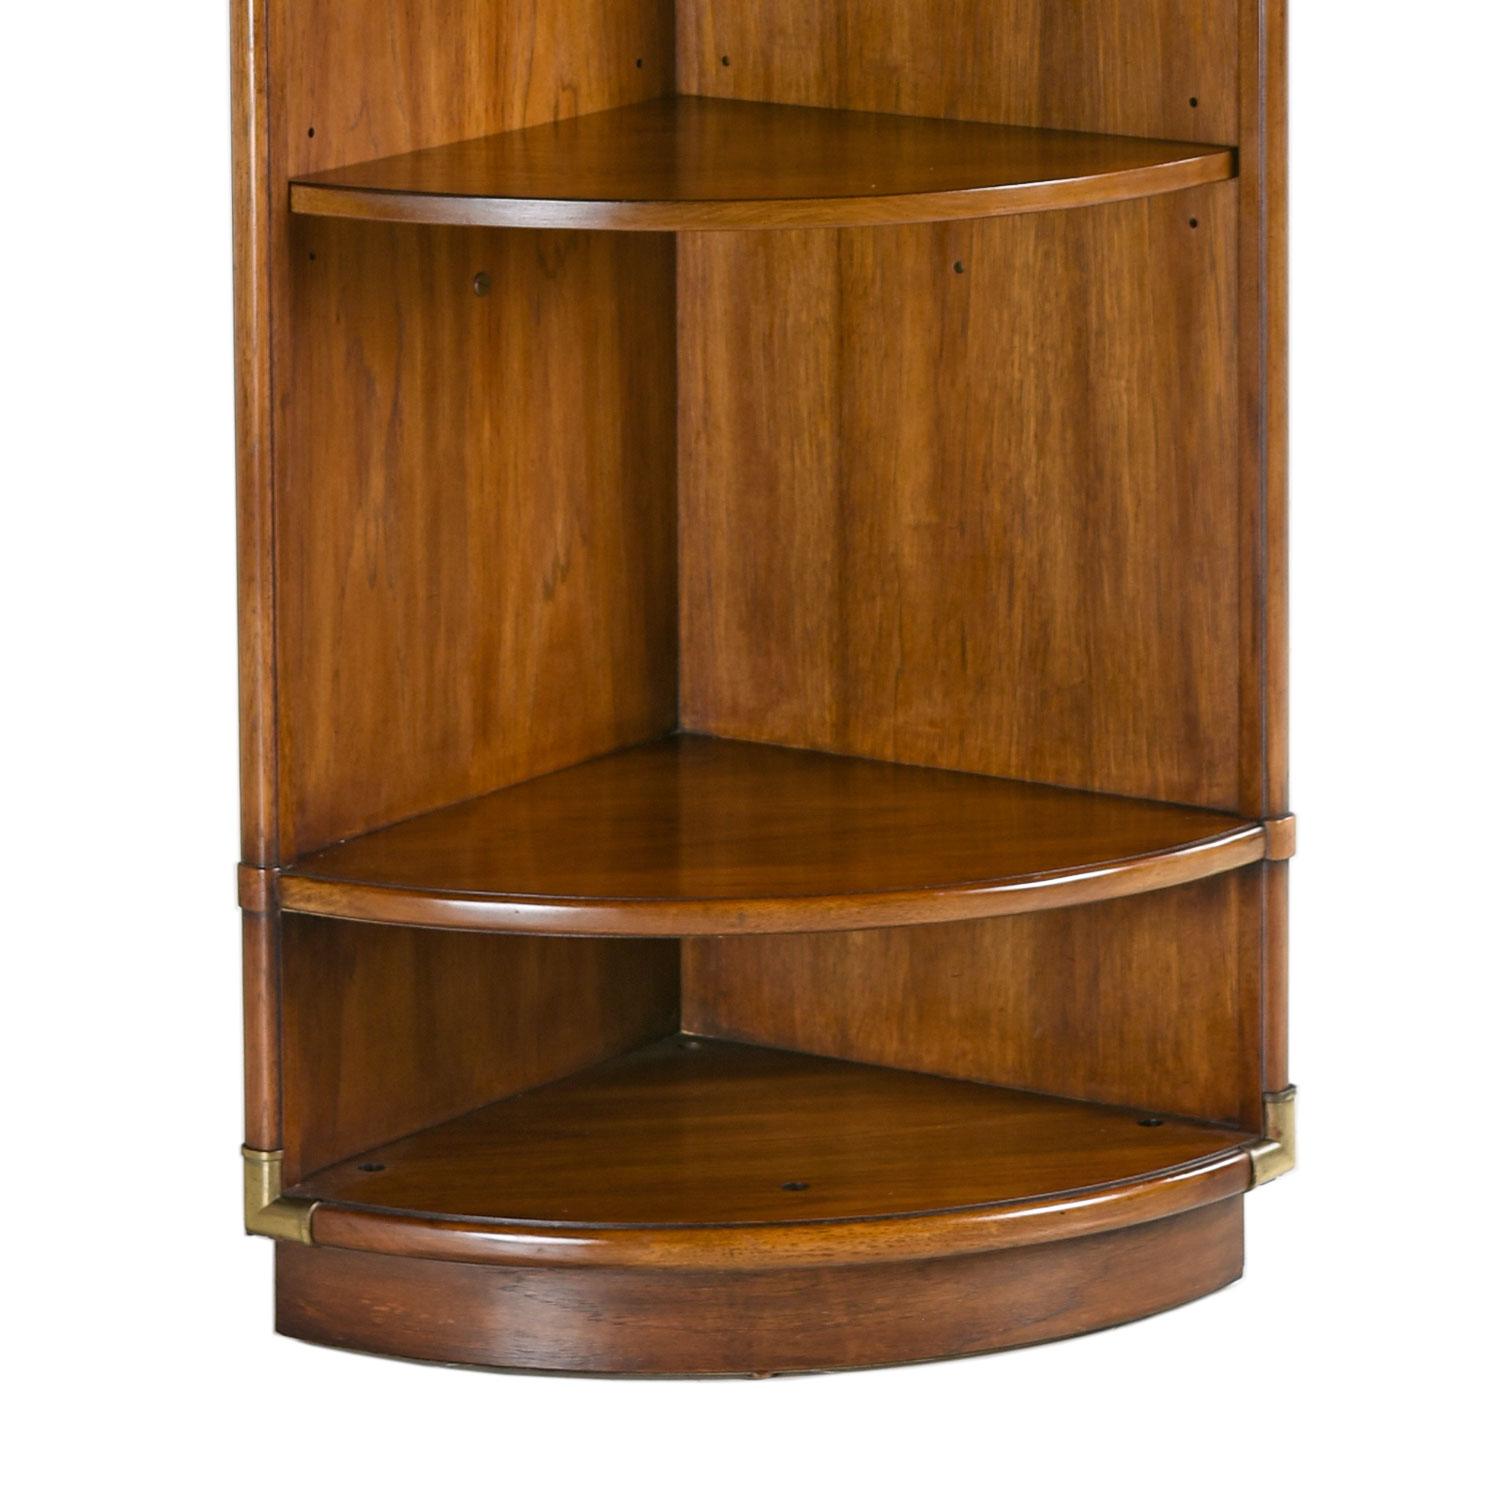 Solid wood Campaign style corner cabinet curio bookshelf made by esteemed US furniture maker Drexel Heritage in the 1970s. Faux bamboo brass corner accents on all four corners tie together British traditional and Eastern design. This tall cabinet